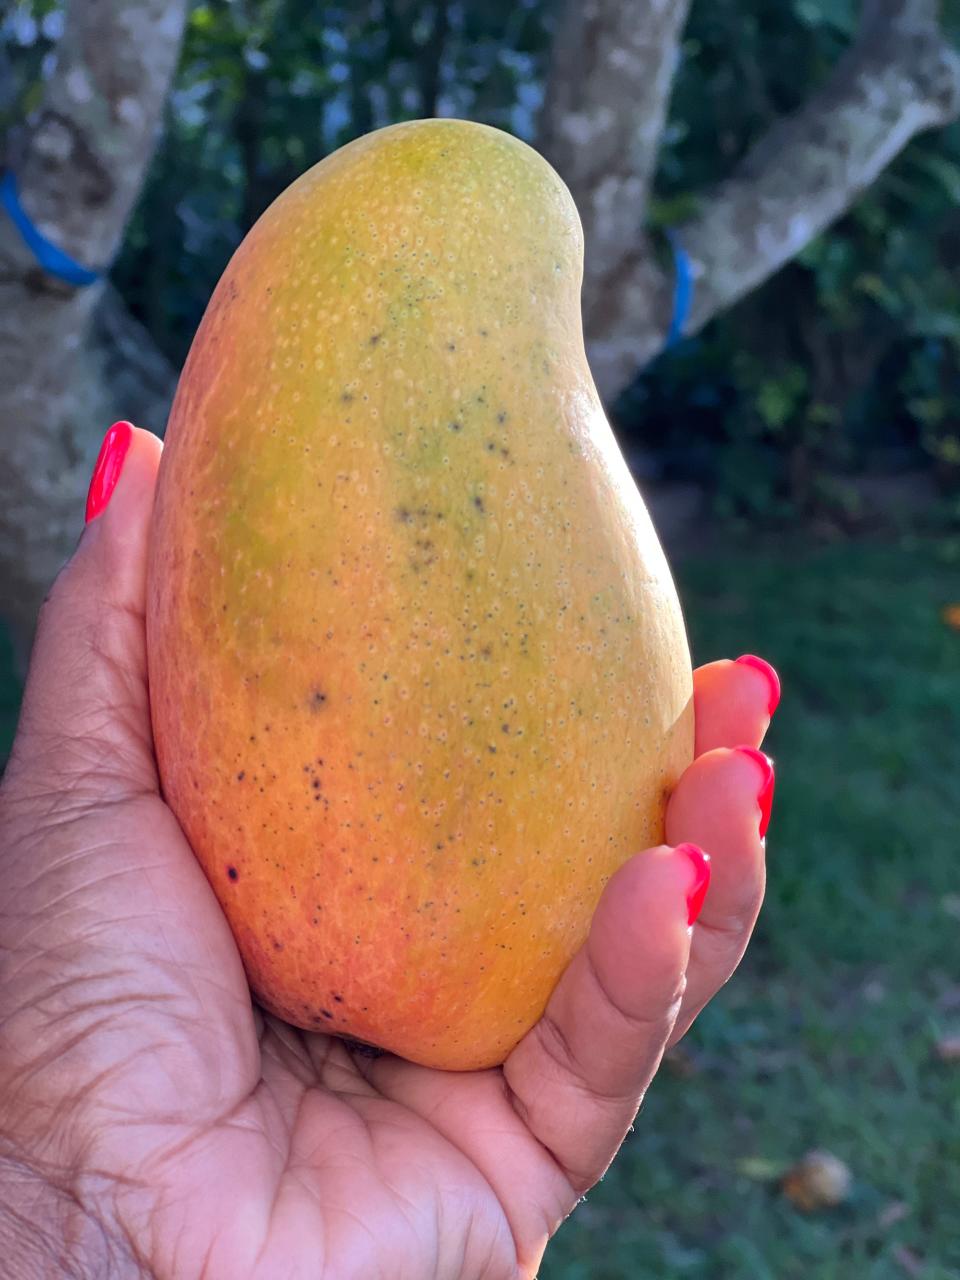 Behold the East Indian mango! David and Dionne Mitchell shipped dozens of this variety to friends around the country, including Miami.